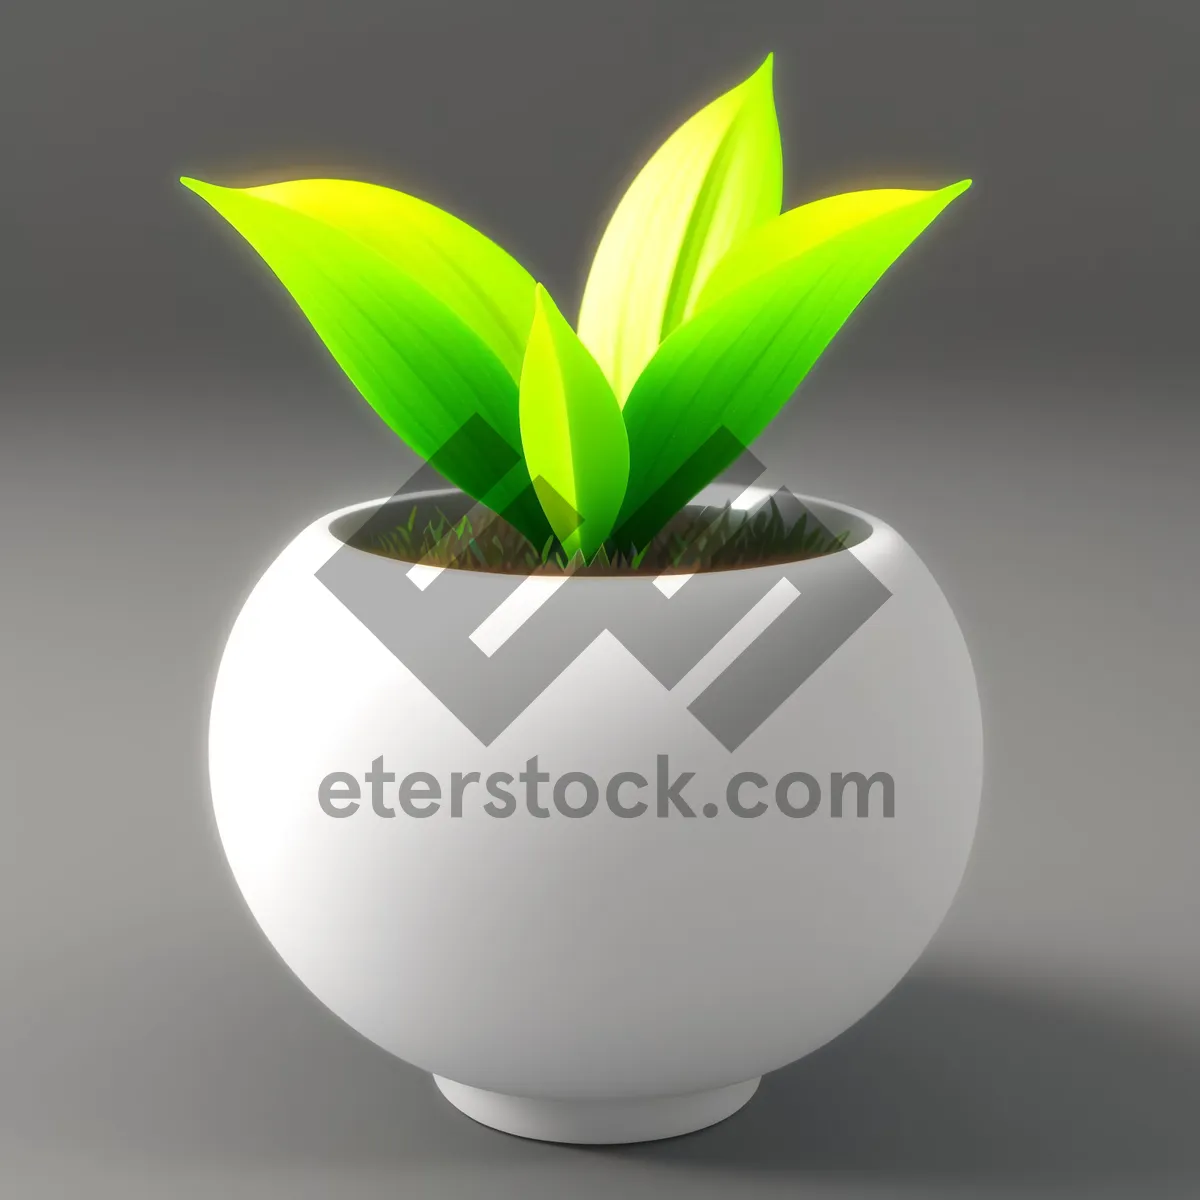 Picture of Leafy Green Seedling Icon - Natural Plant Symbol